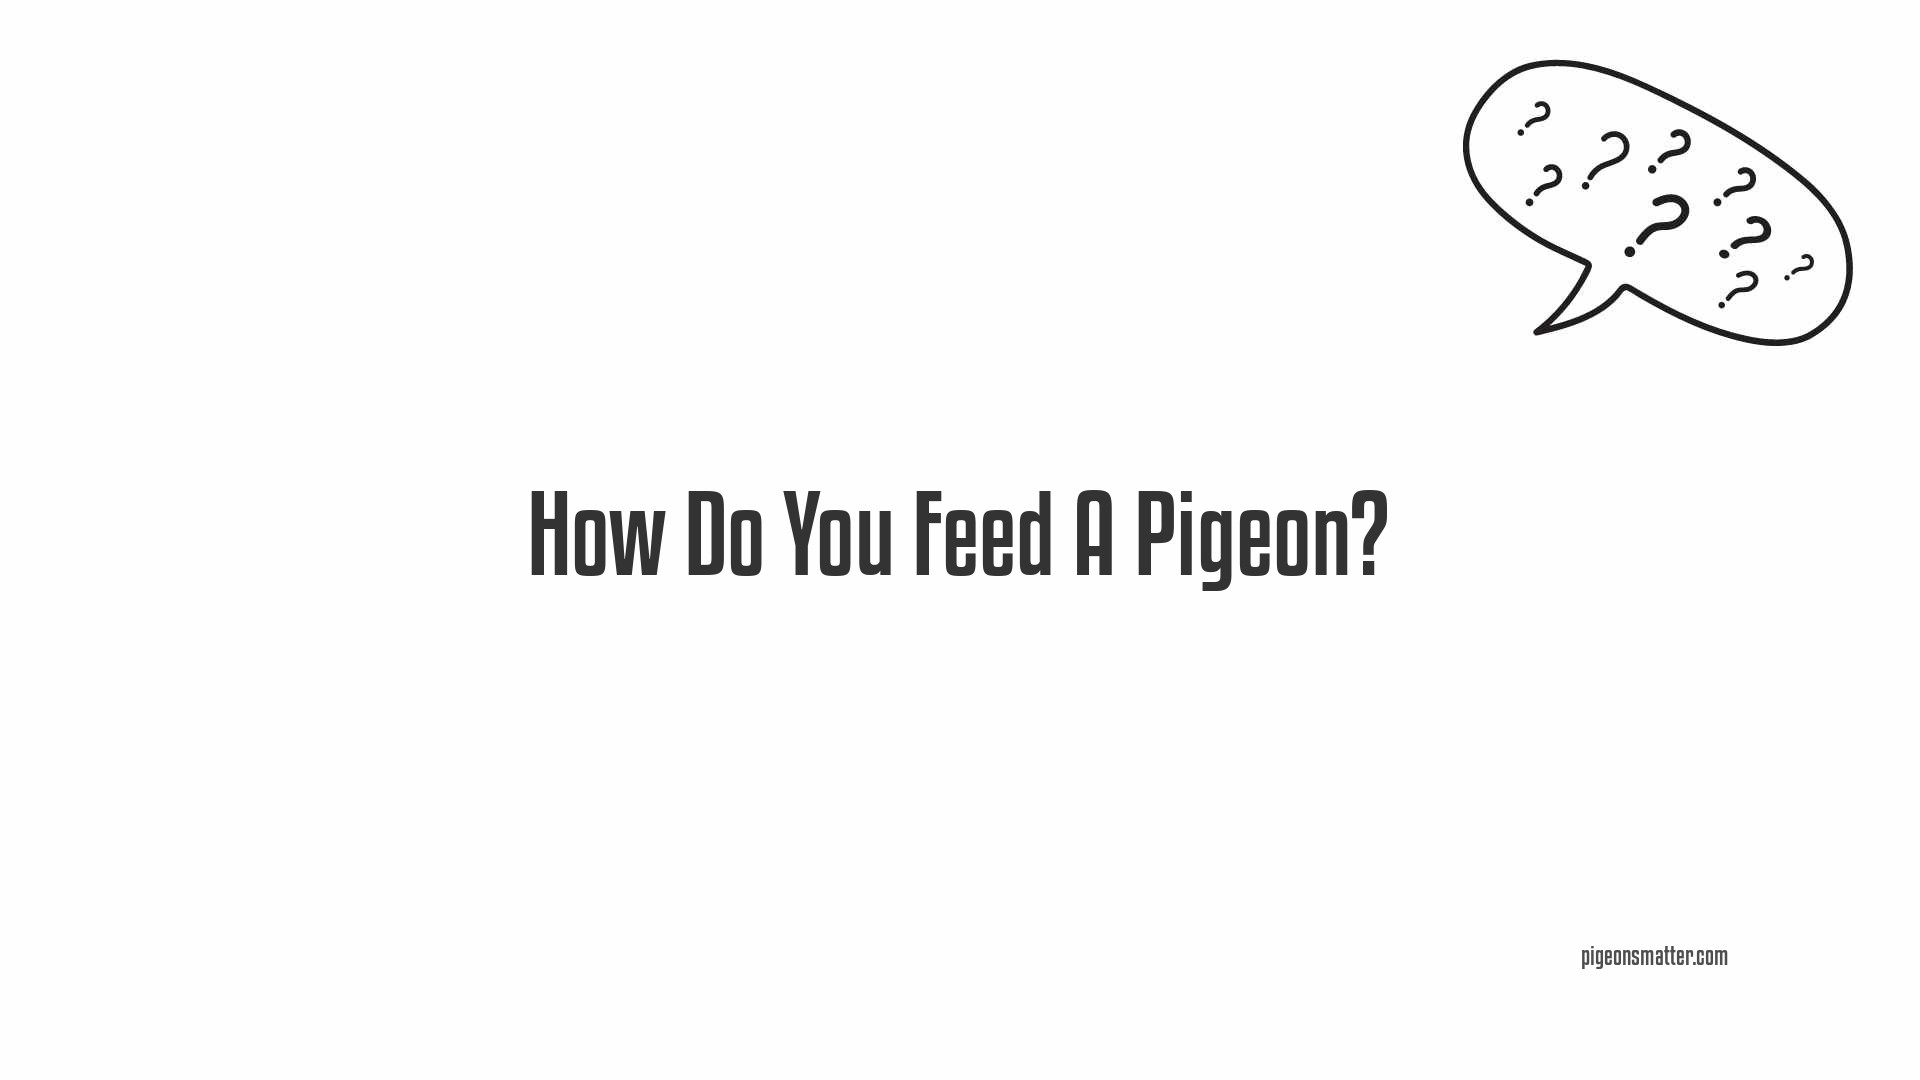 How Do You Feed A Pigeon?